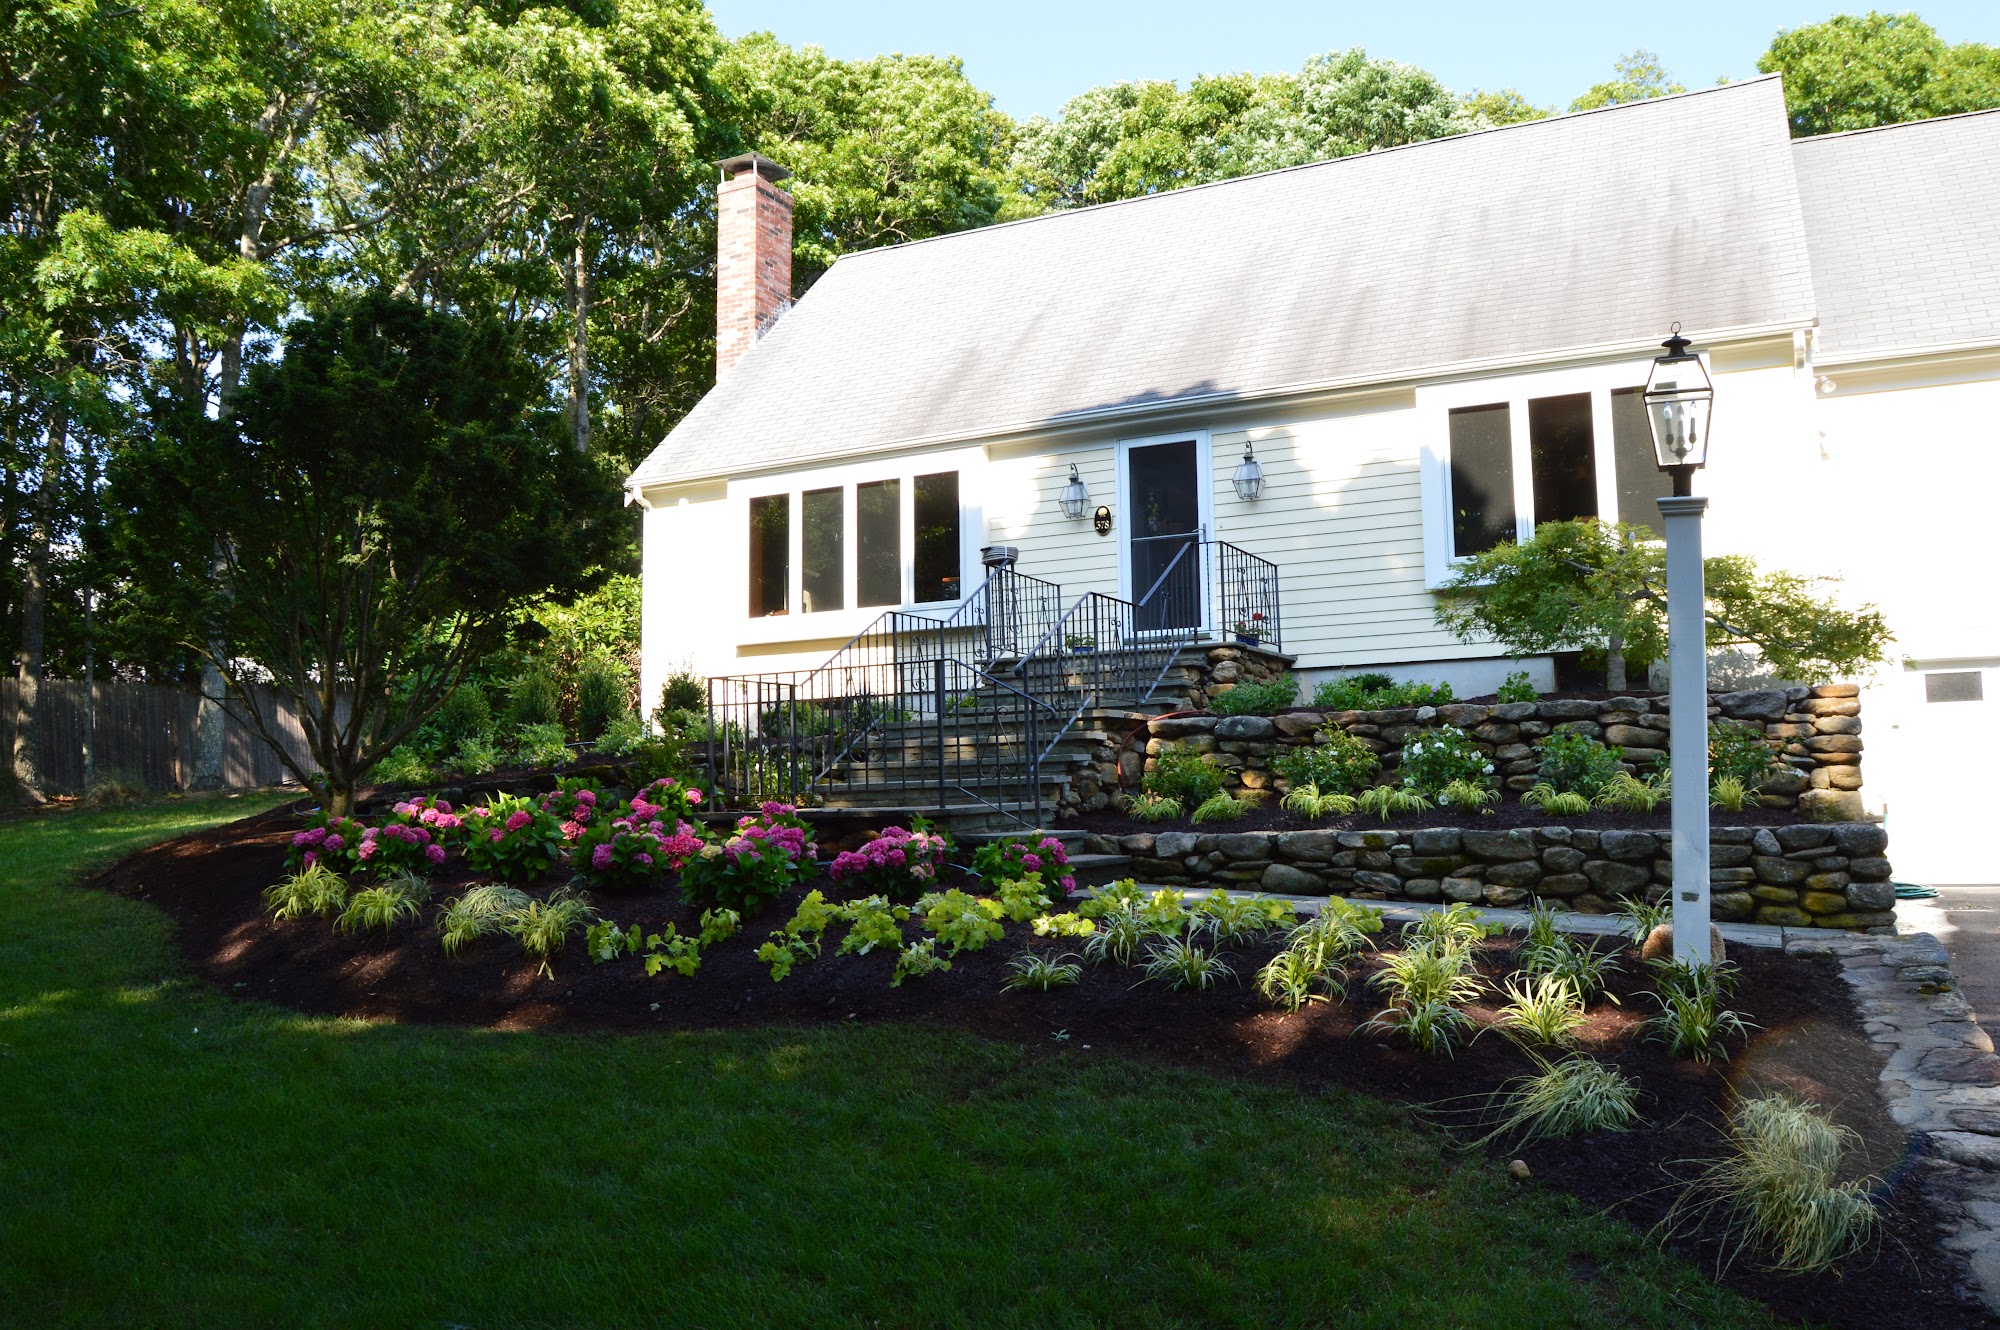 Gardens By Barbara Conolly, Inc. 366 Carriage Shop Rd, East Falmouth Massachusetts 02536